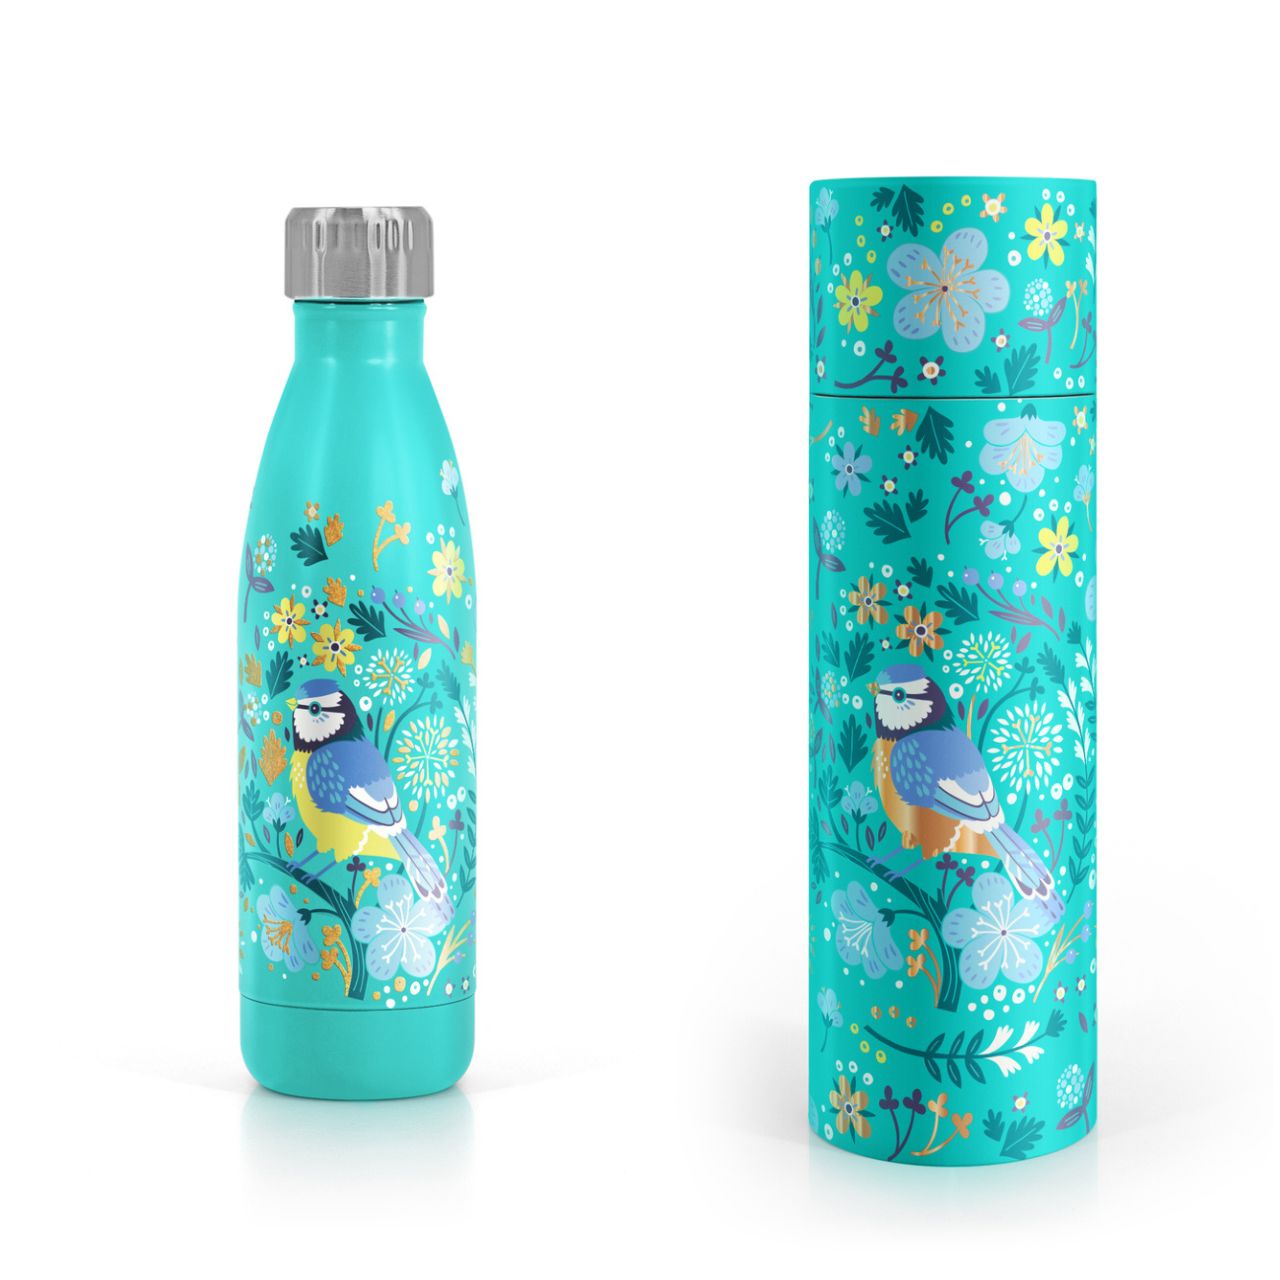 Tipperary Crystal Birdy Metal Water Bottle - Blue Tit  The Birdy Collection is a series of 6 exclusively commissioned illustrations inspired by native Irish birds; Bullfinch, Goldfinch, Blue tit, Greenfinch, Kingfisher and Robin.